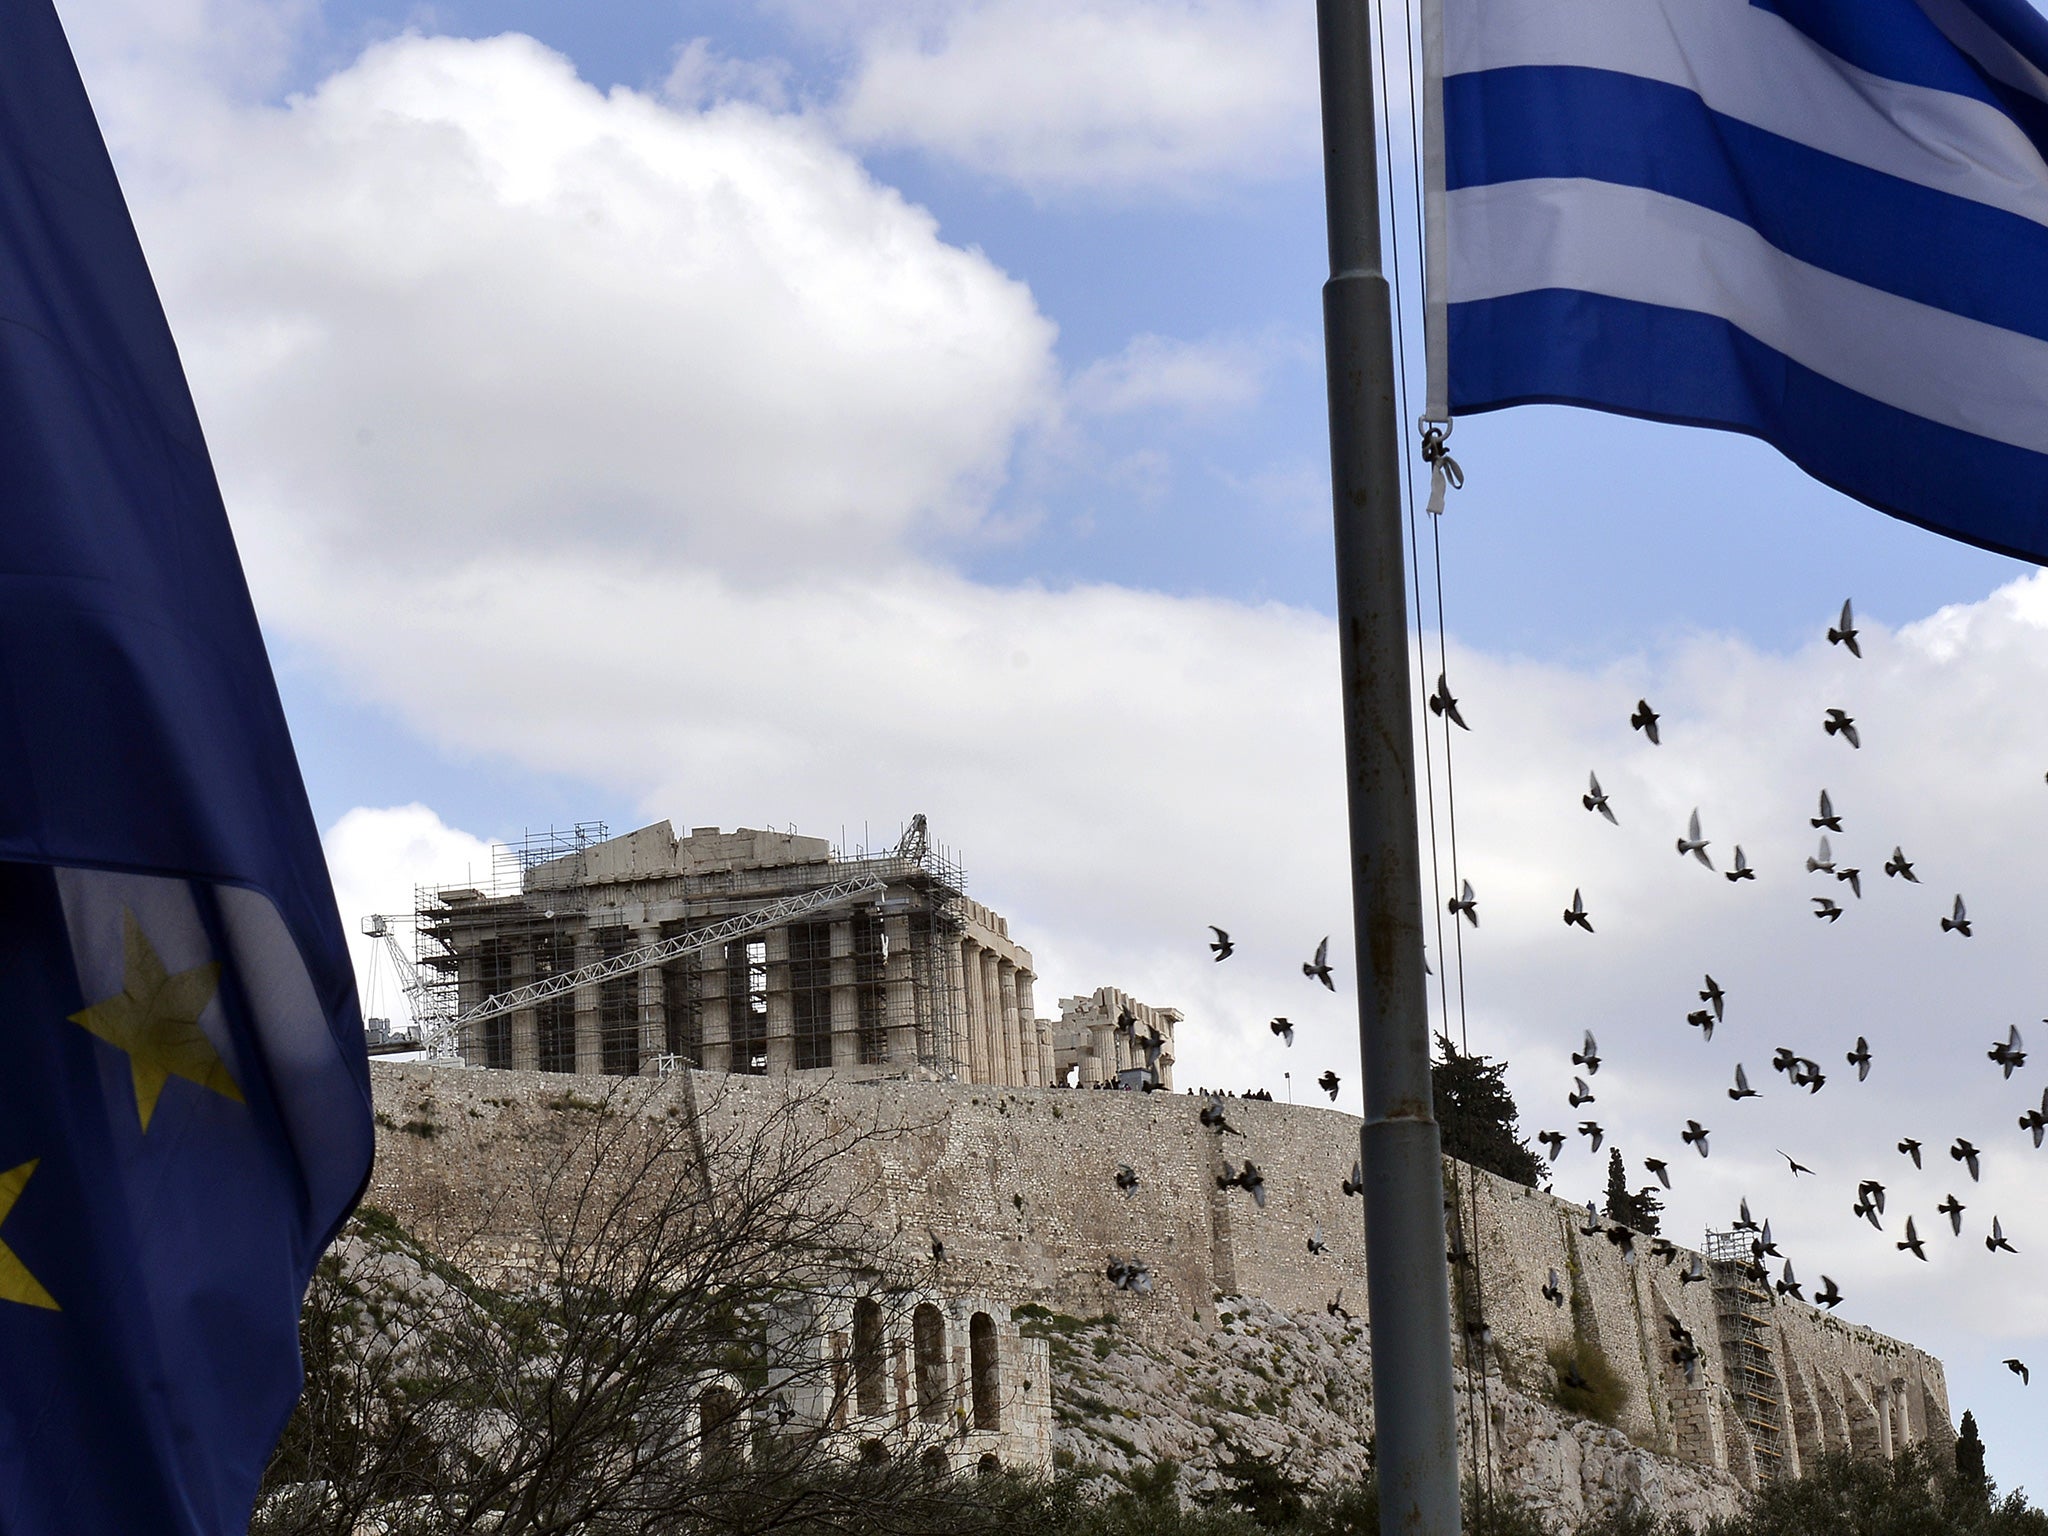 The 'Grexit', and a return to the drachma, would be a calamity